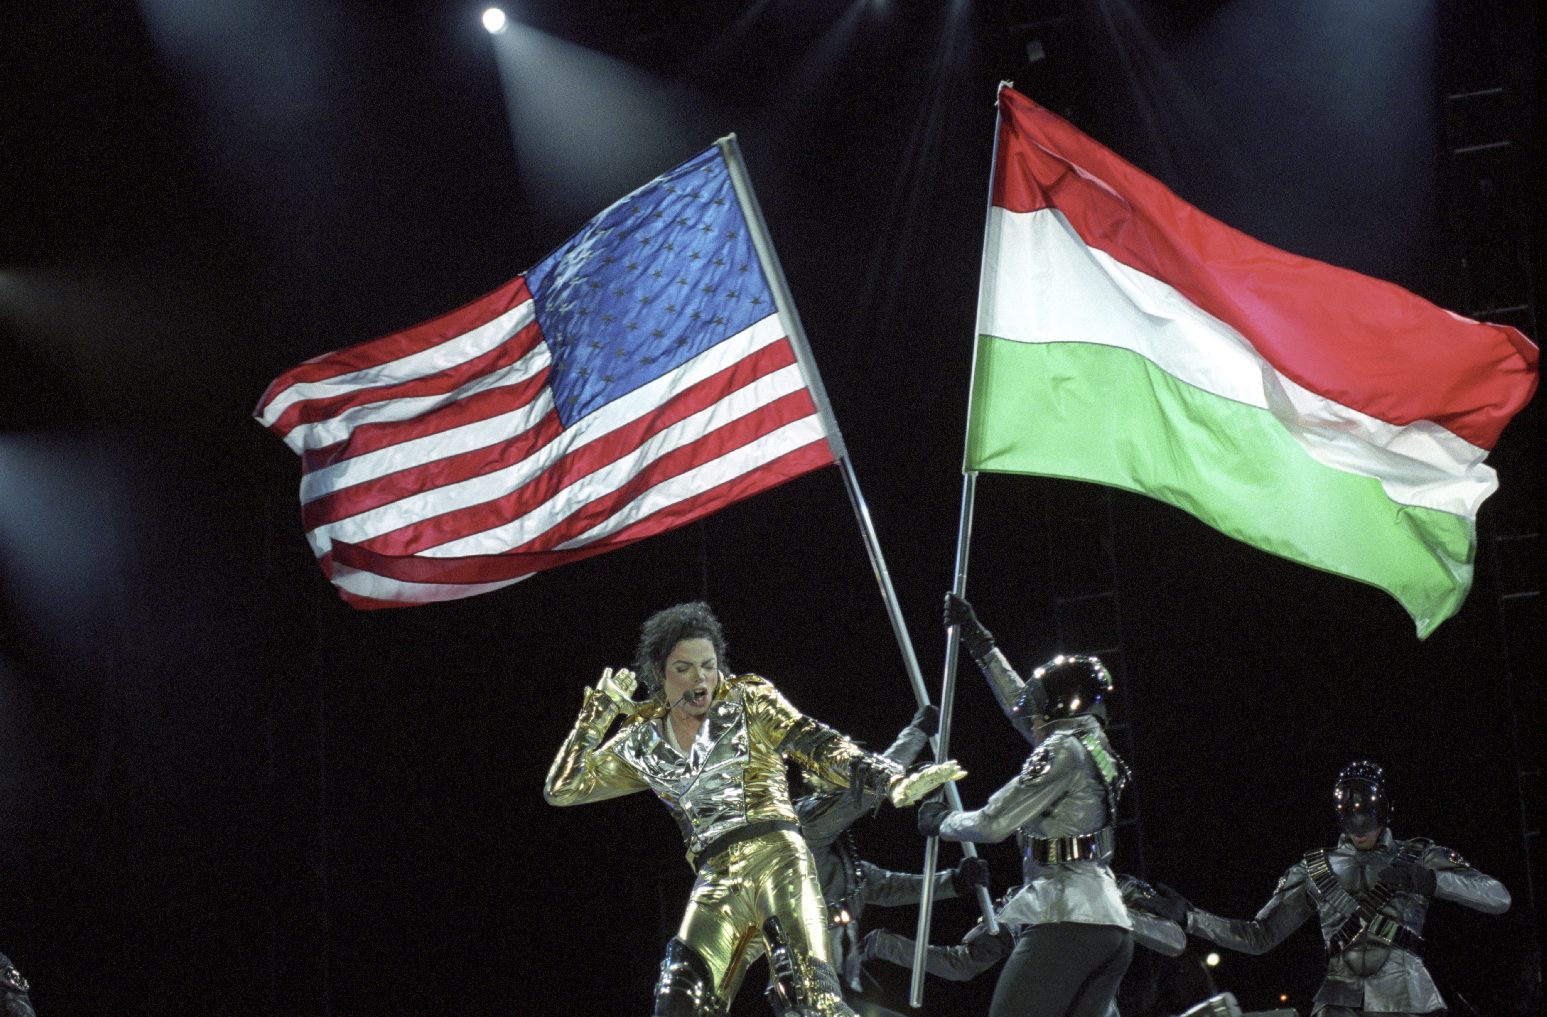 Shot from the concert Jacko gave in Budapest